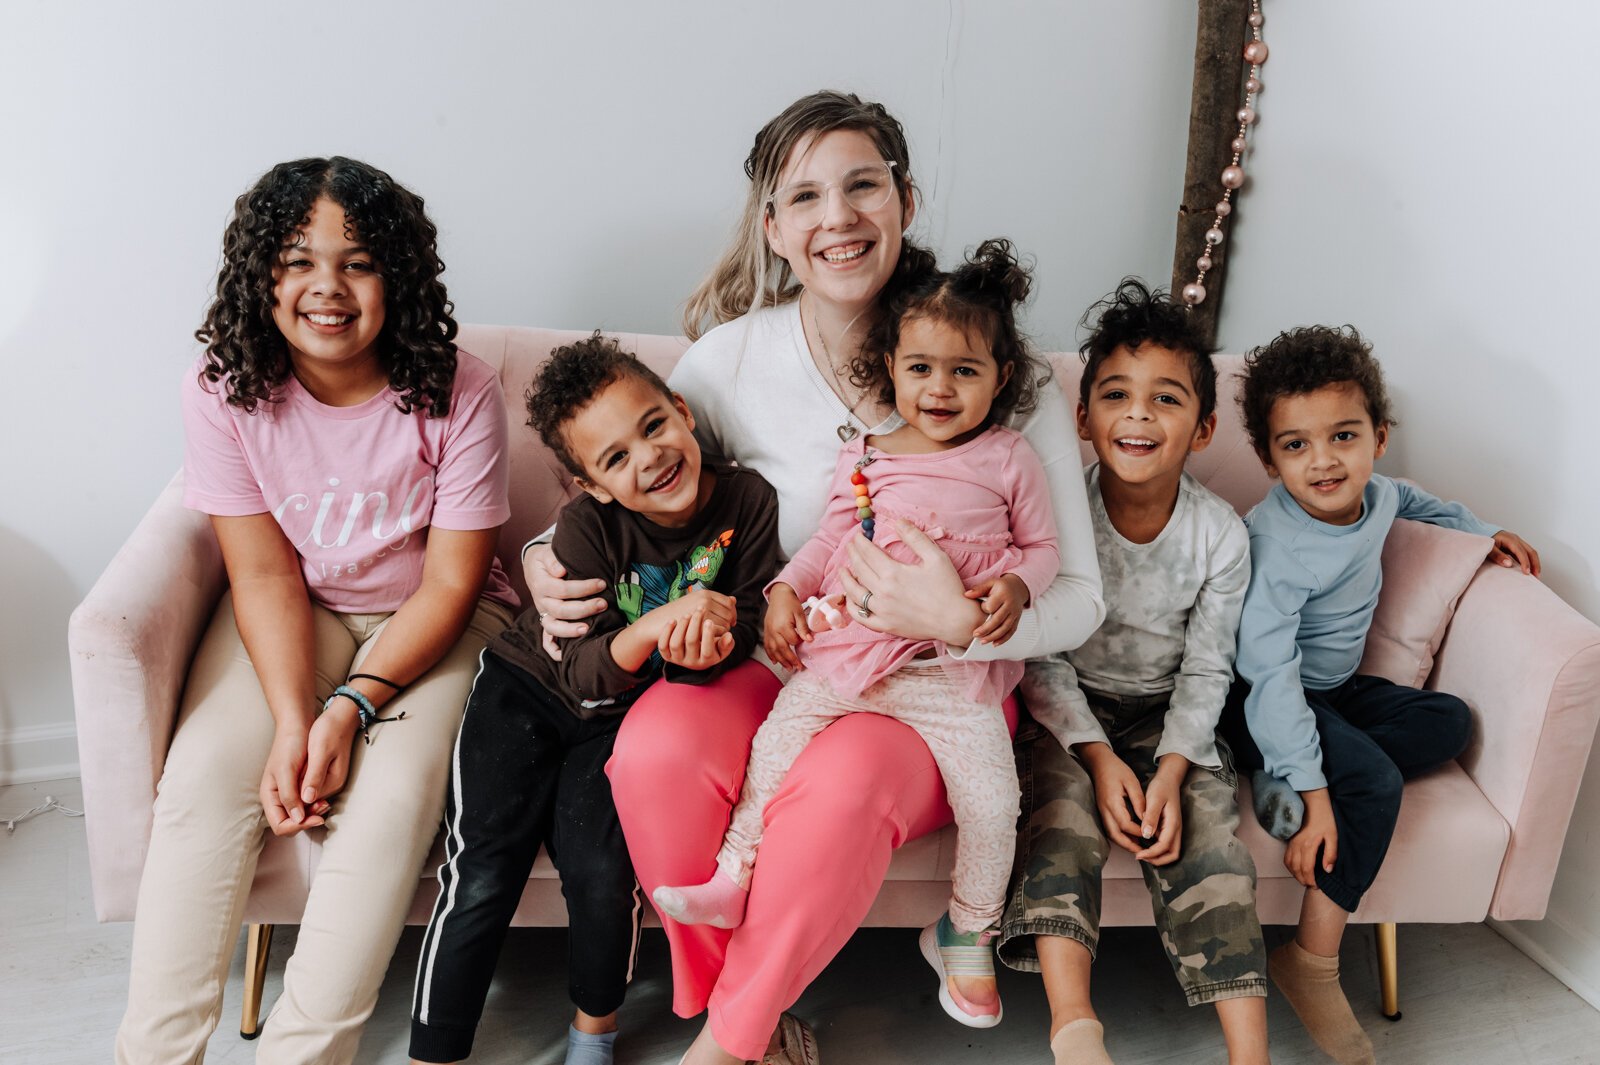 Owner and founder Grayce Holloway pictured with her children from left: Makenzie, 11, Zaden, 5, Mia, 1, Eizajah, 6, and Benjamin, 3 at Icing for Izaac.